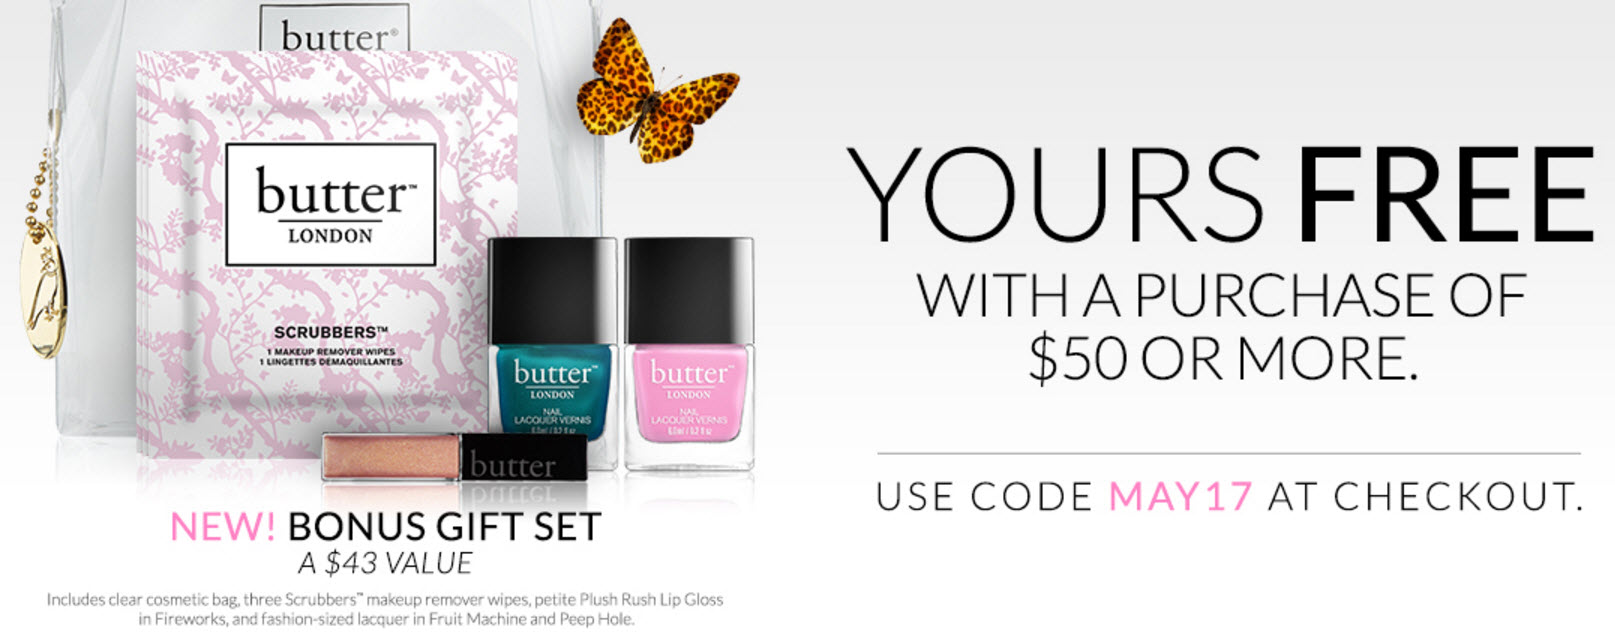 Receive a free 7-piece bonus gift with your $50 Butter London purchase